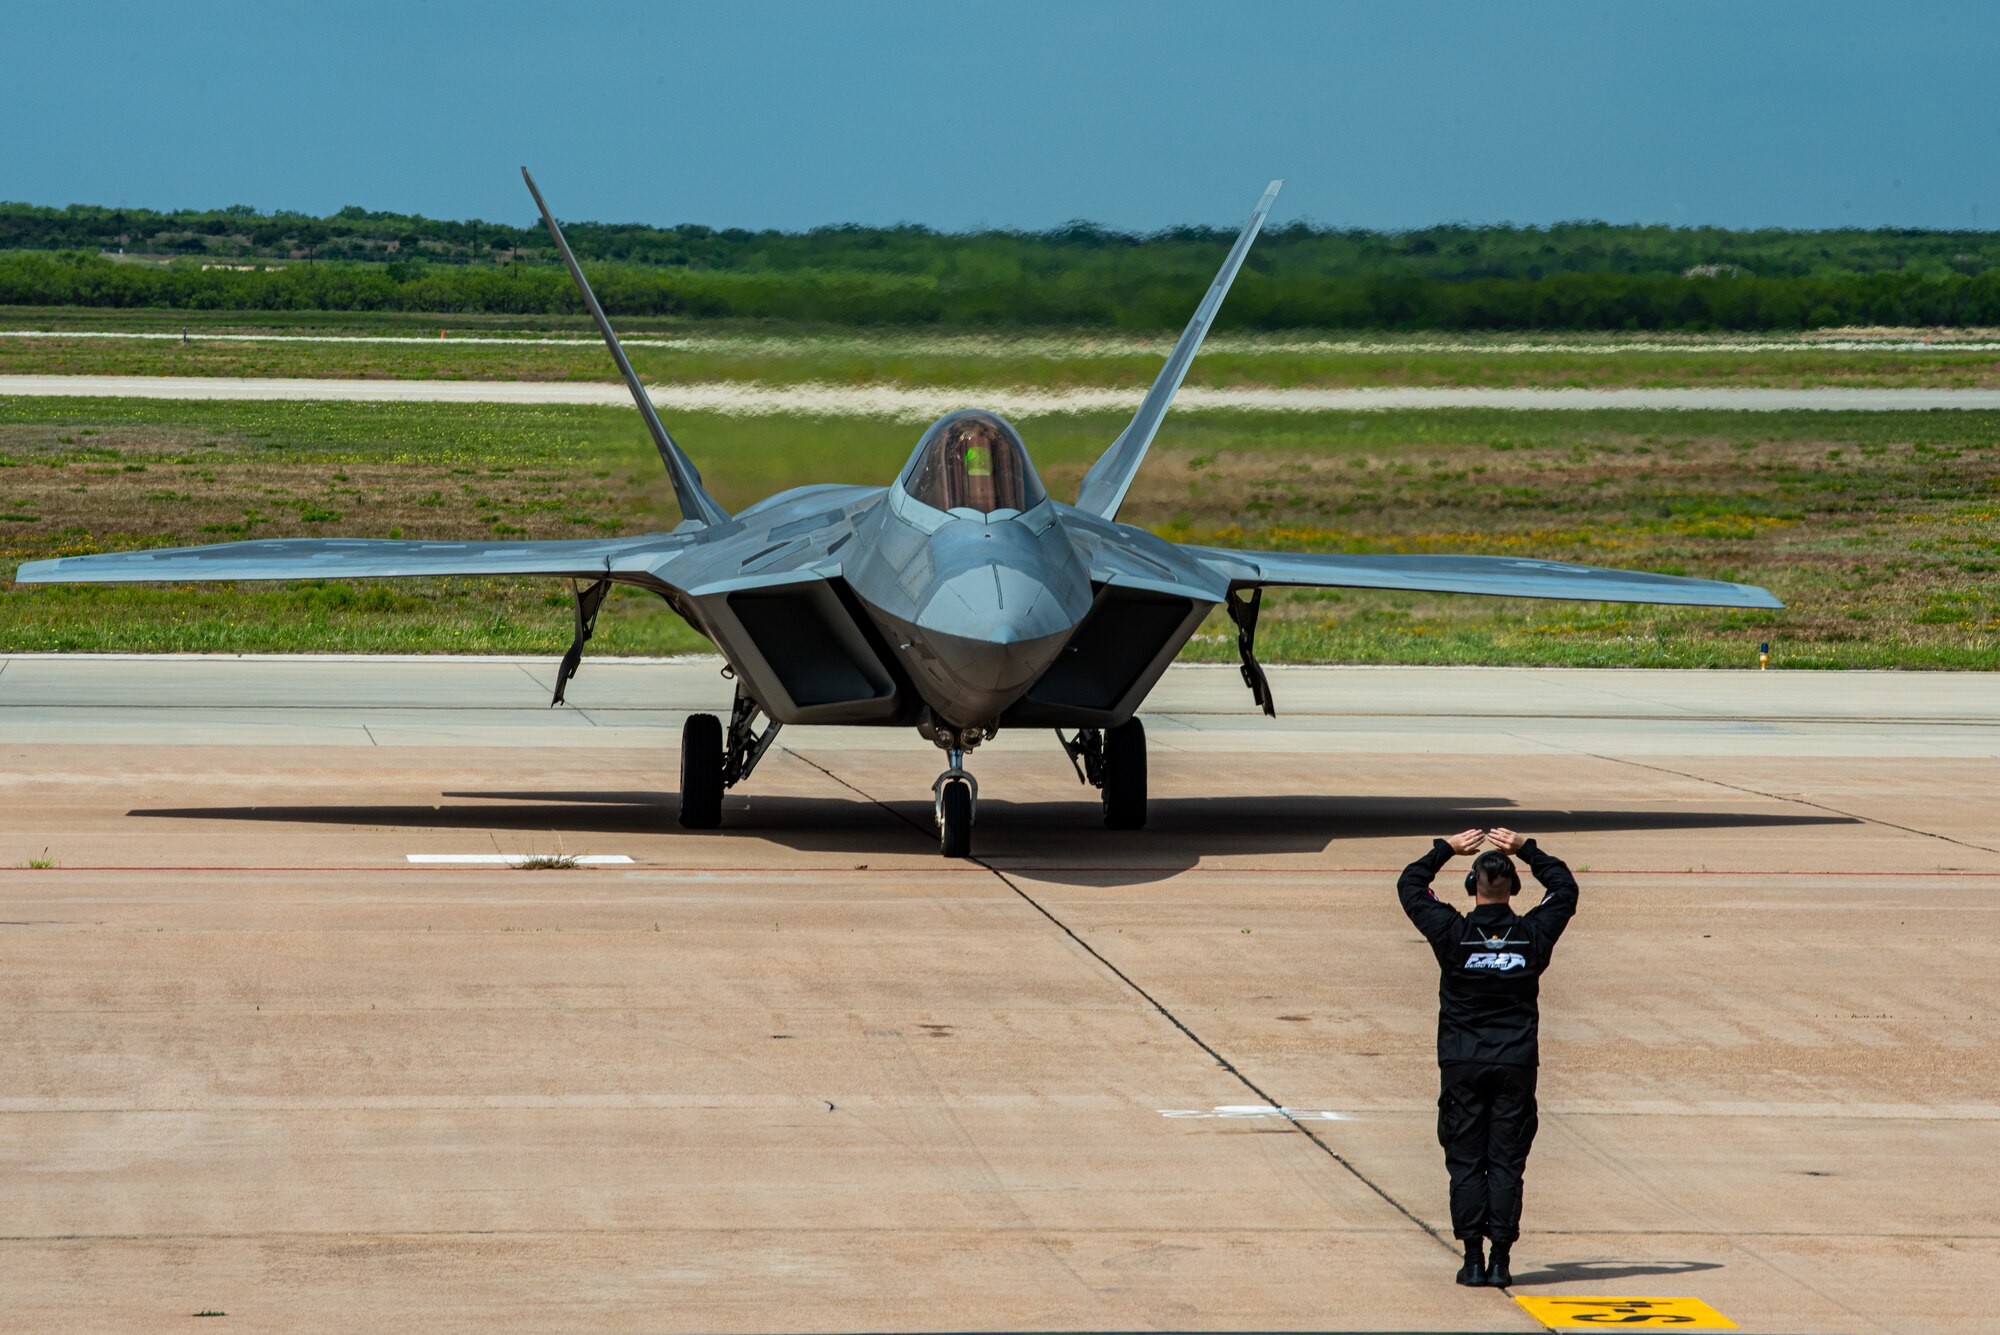 A F-22 Raptor sits on display during the 2023 Dyess Big Country Air Fest on Dyess Air Force Base, Texas, April 22, 2023. More than 30,000 event goers attended the one-day event highlighting the best of America’s only Lift and Strike base, Air Force heritage and Dyess community partners. The air show featured the F-22 Raptor demo team, U.S. Air Force Academy Wings of Blue, U.S. Army Golden Knights, WW II heritage flight and B-1B Lancer and C-130J Super Hercules fly overs. (U.S. Air Force photo by Airman 1st Class Alondra Cristobal Hernandez)